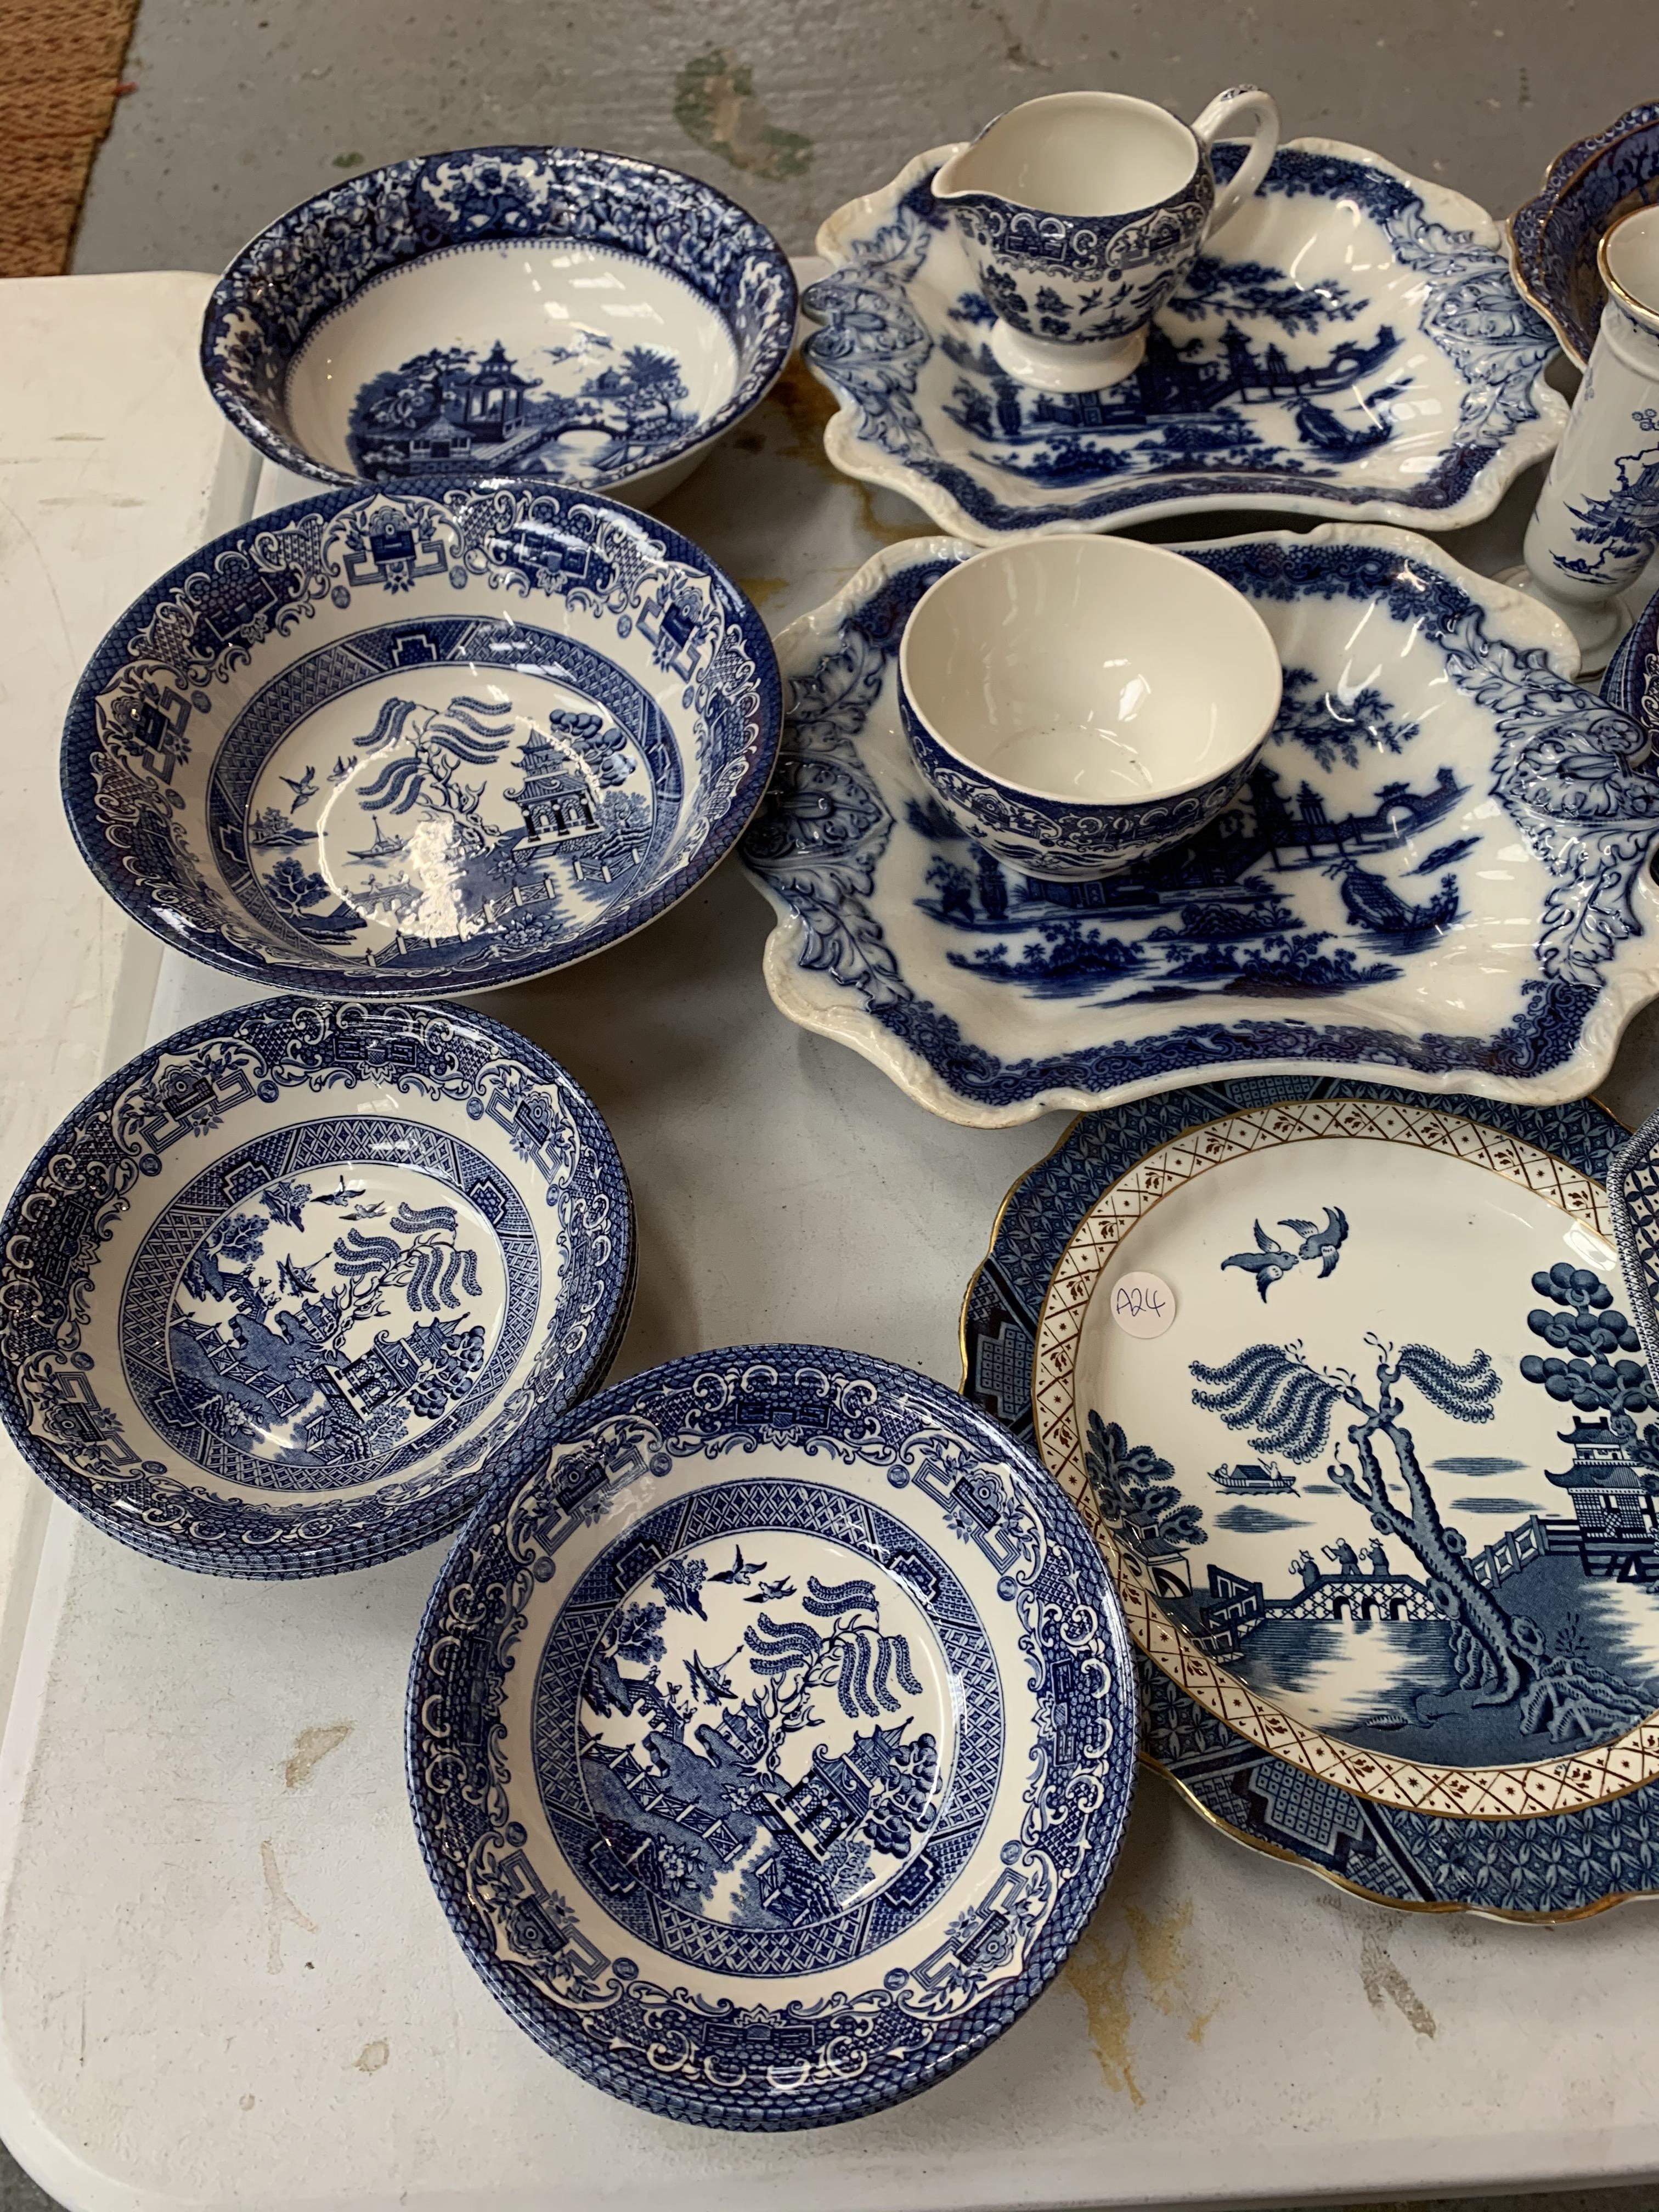 A LARGE COLLECTION OF BLUE AND WHITE POTTERY WITH TO INCLUDE BOWLS, PLATES, CUPS, SAUCERS, TEAPOT - Image 3 of 3